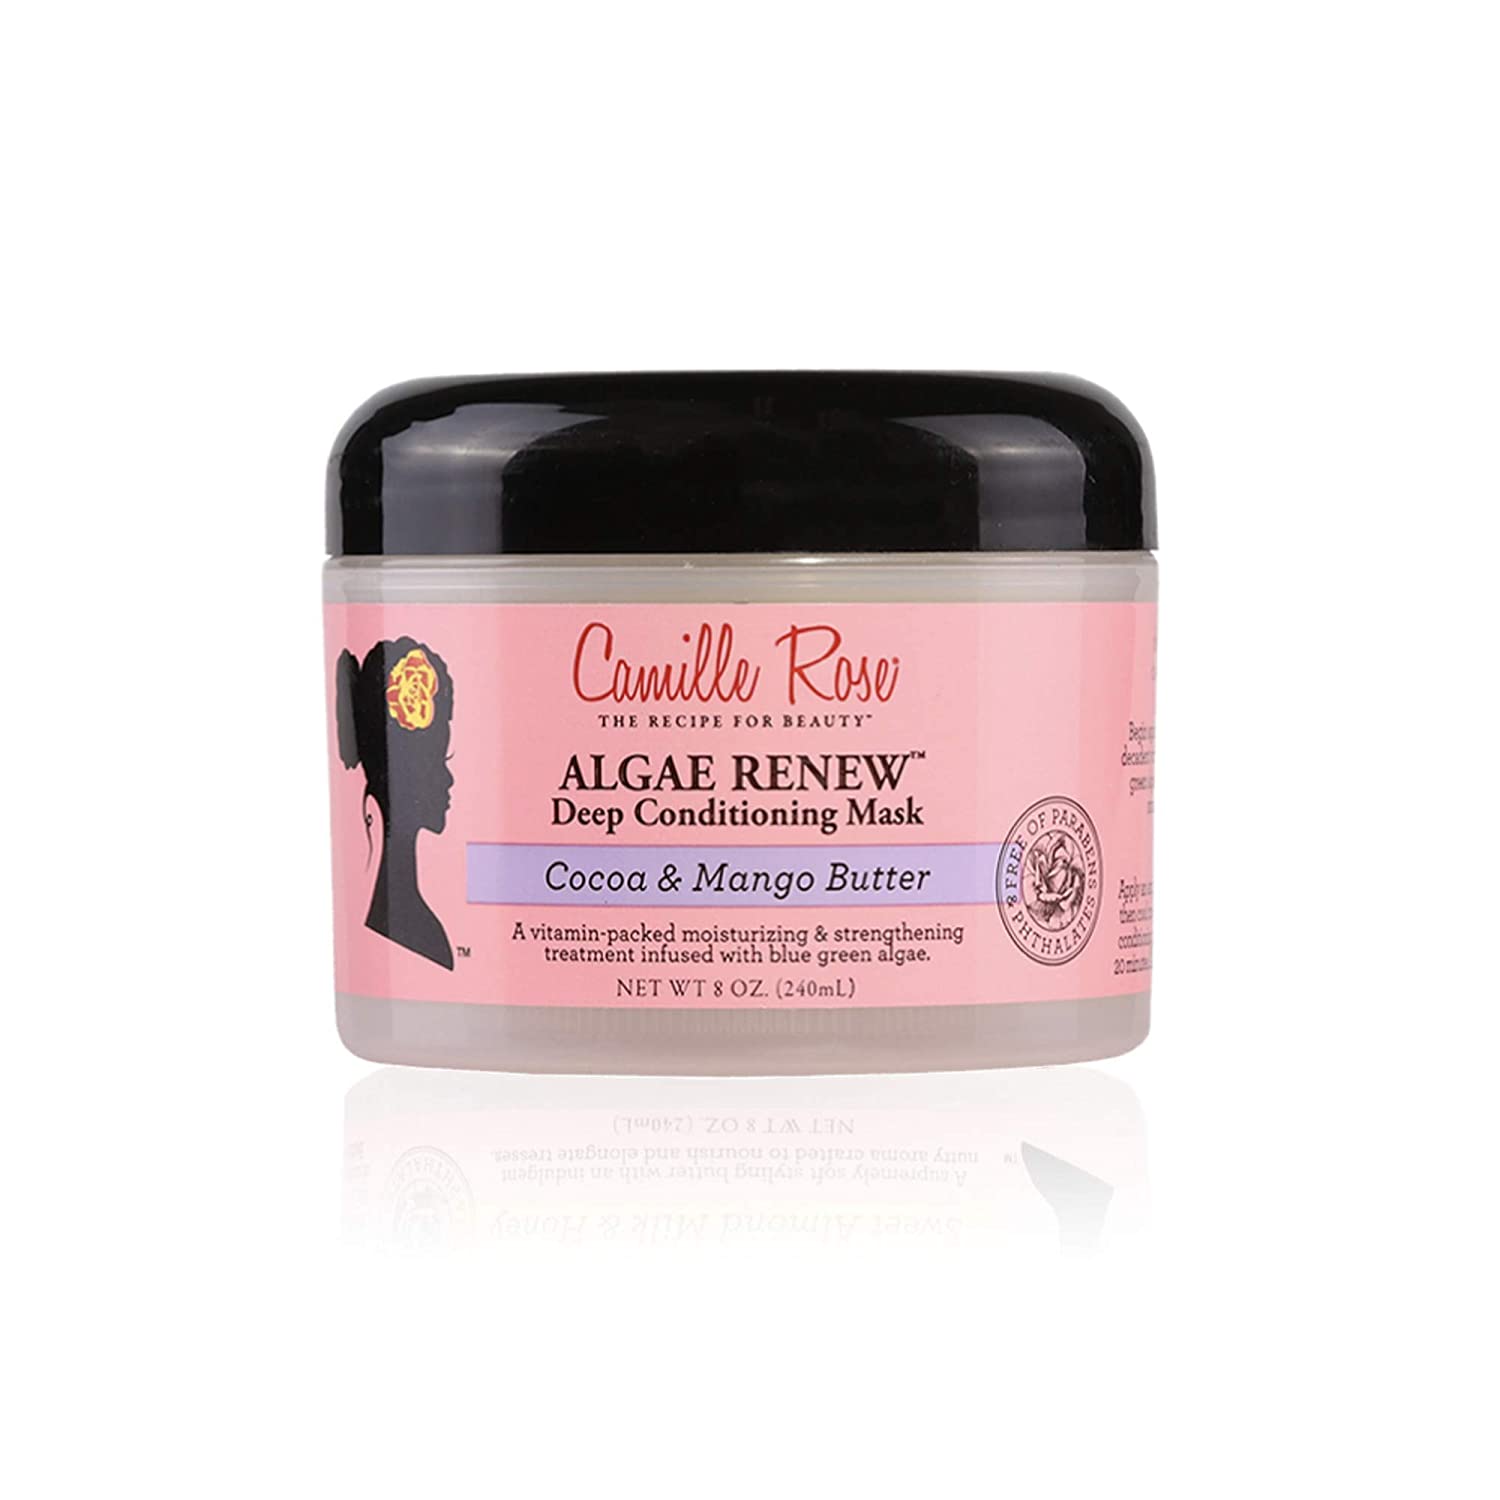  10. Camille Rose Naturals Algae Renew Deep Conditioning Mask is the best mask. 